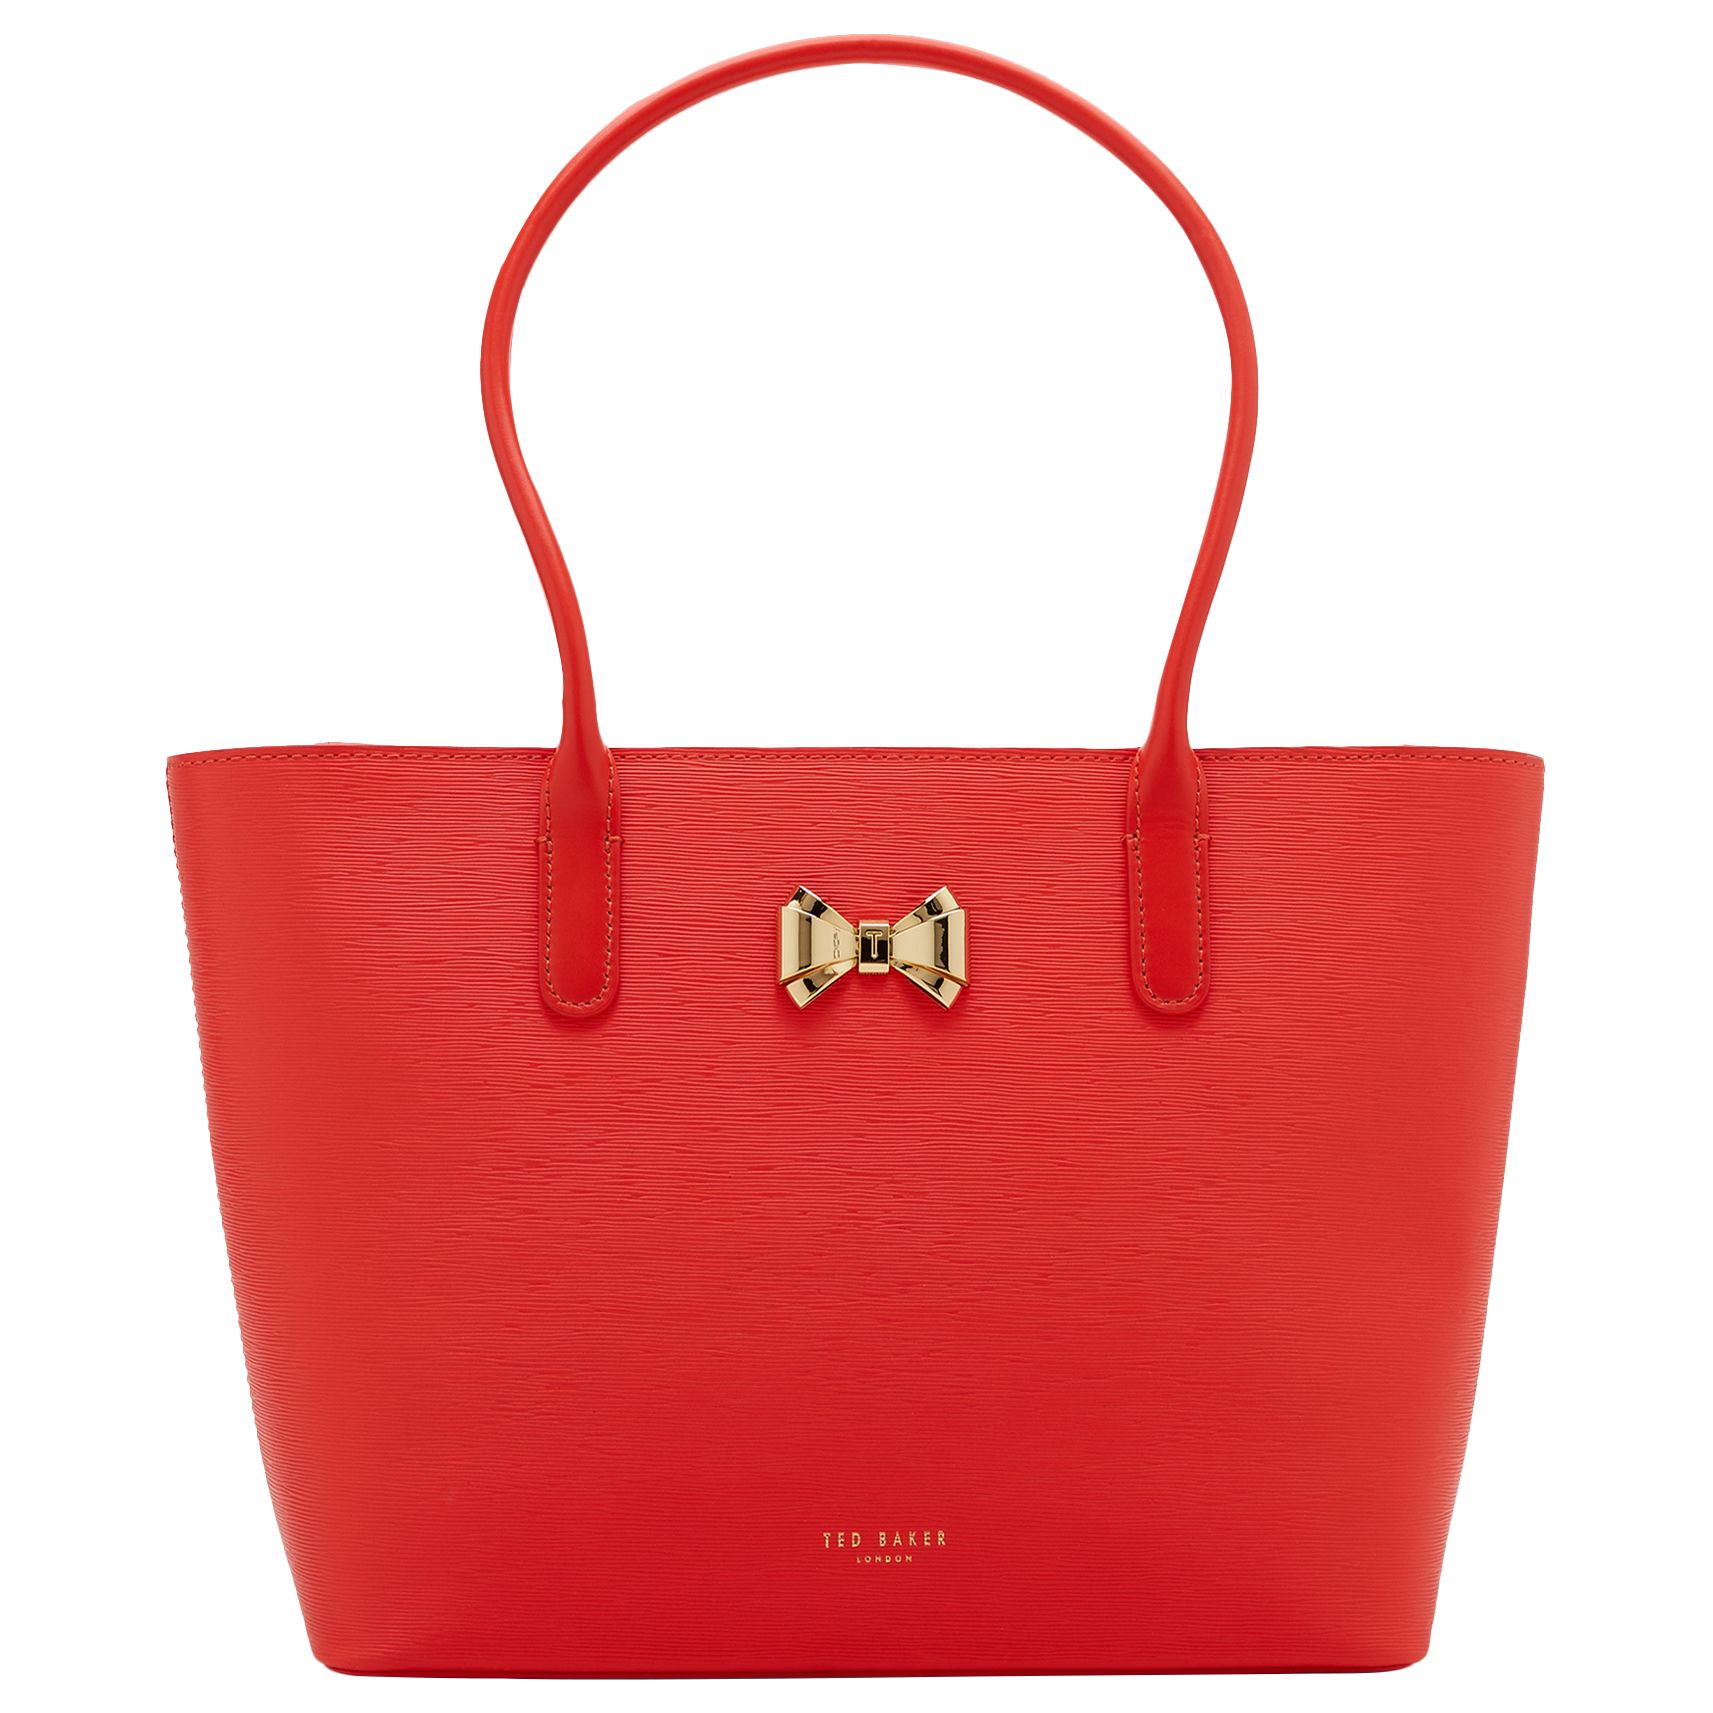 Ted Baker Taleen Curved Bow Leather Shopper Bag, Bright Orange